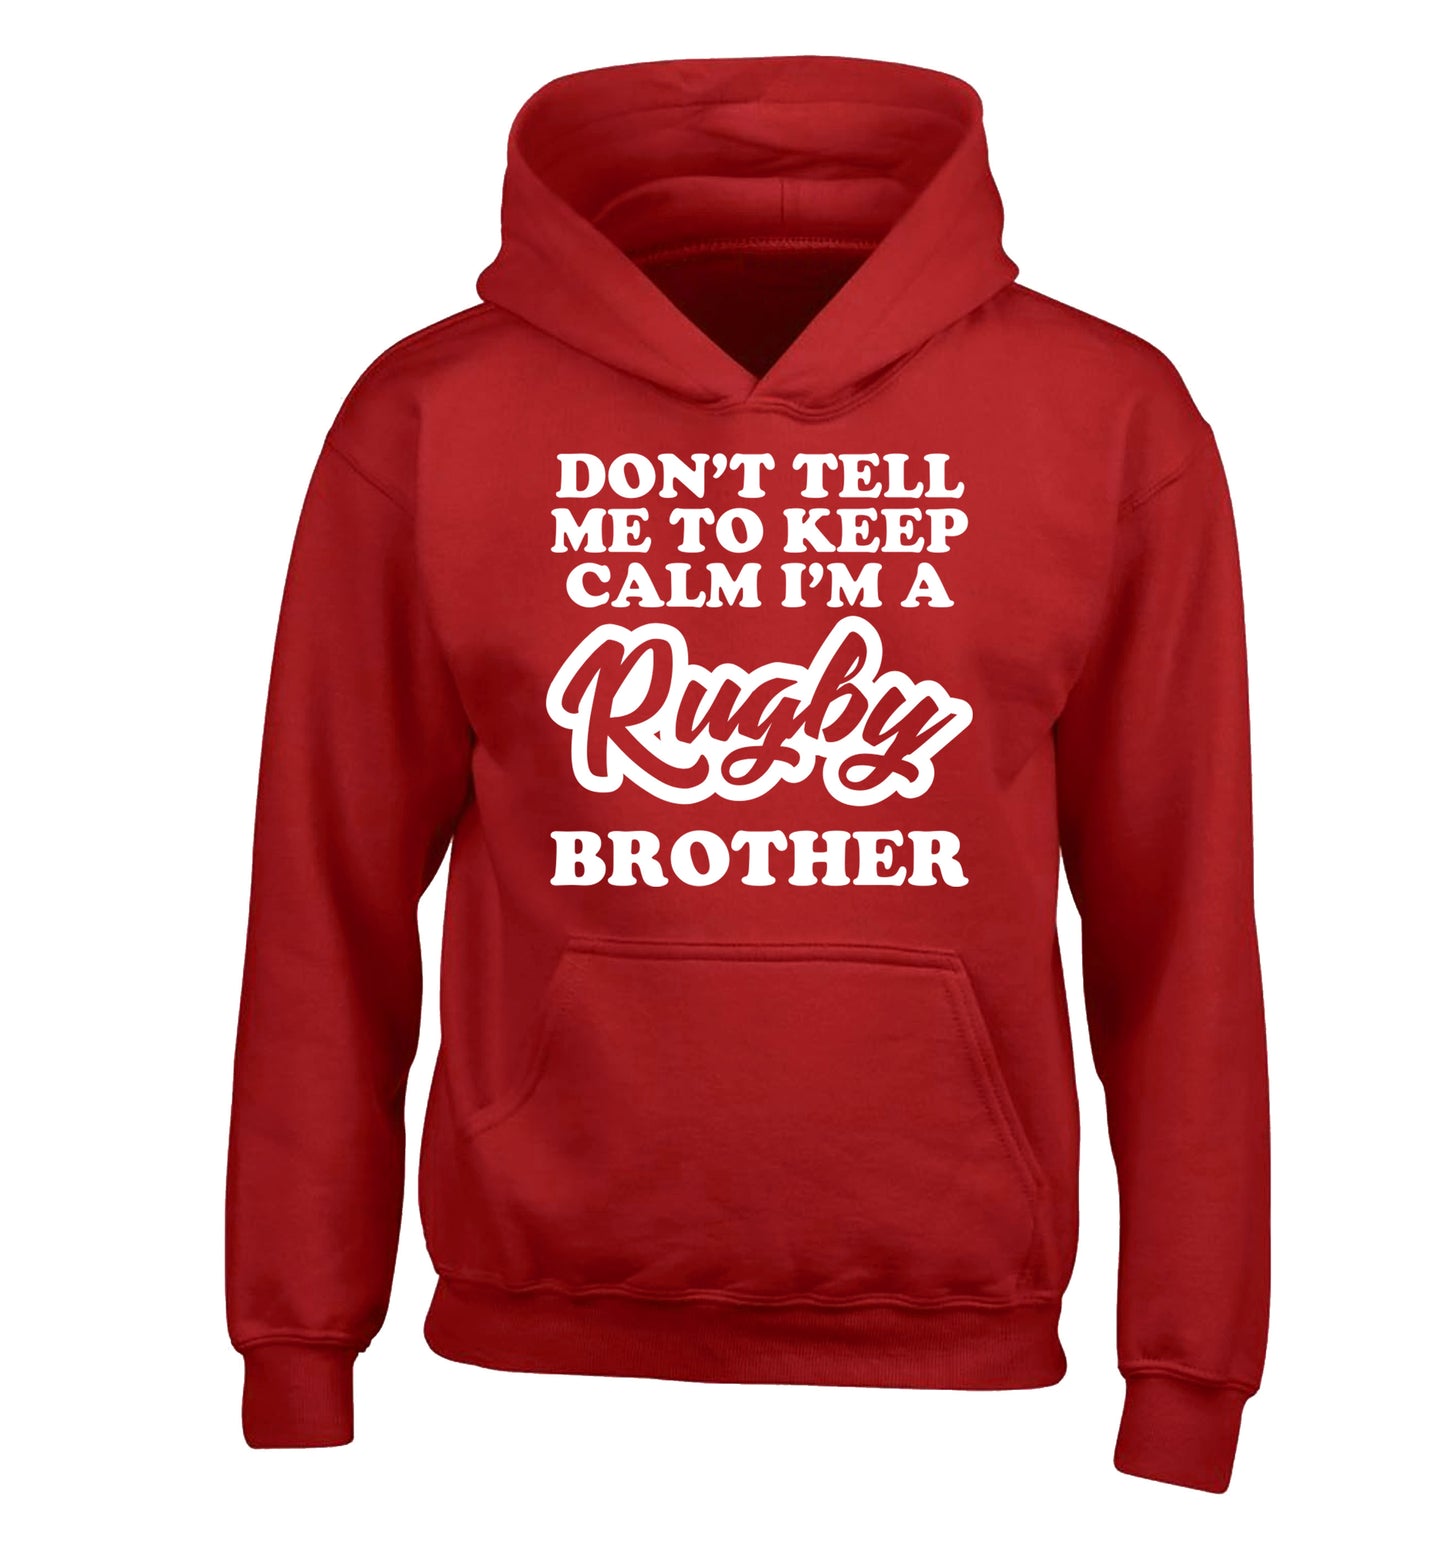 Don't tell me keep calm I'm a rugby brother children's red hoodie 12-13 Years